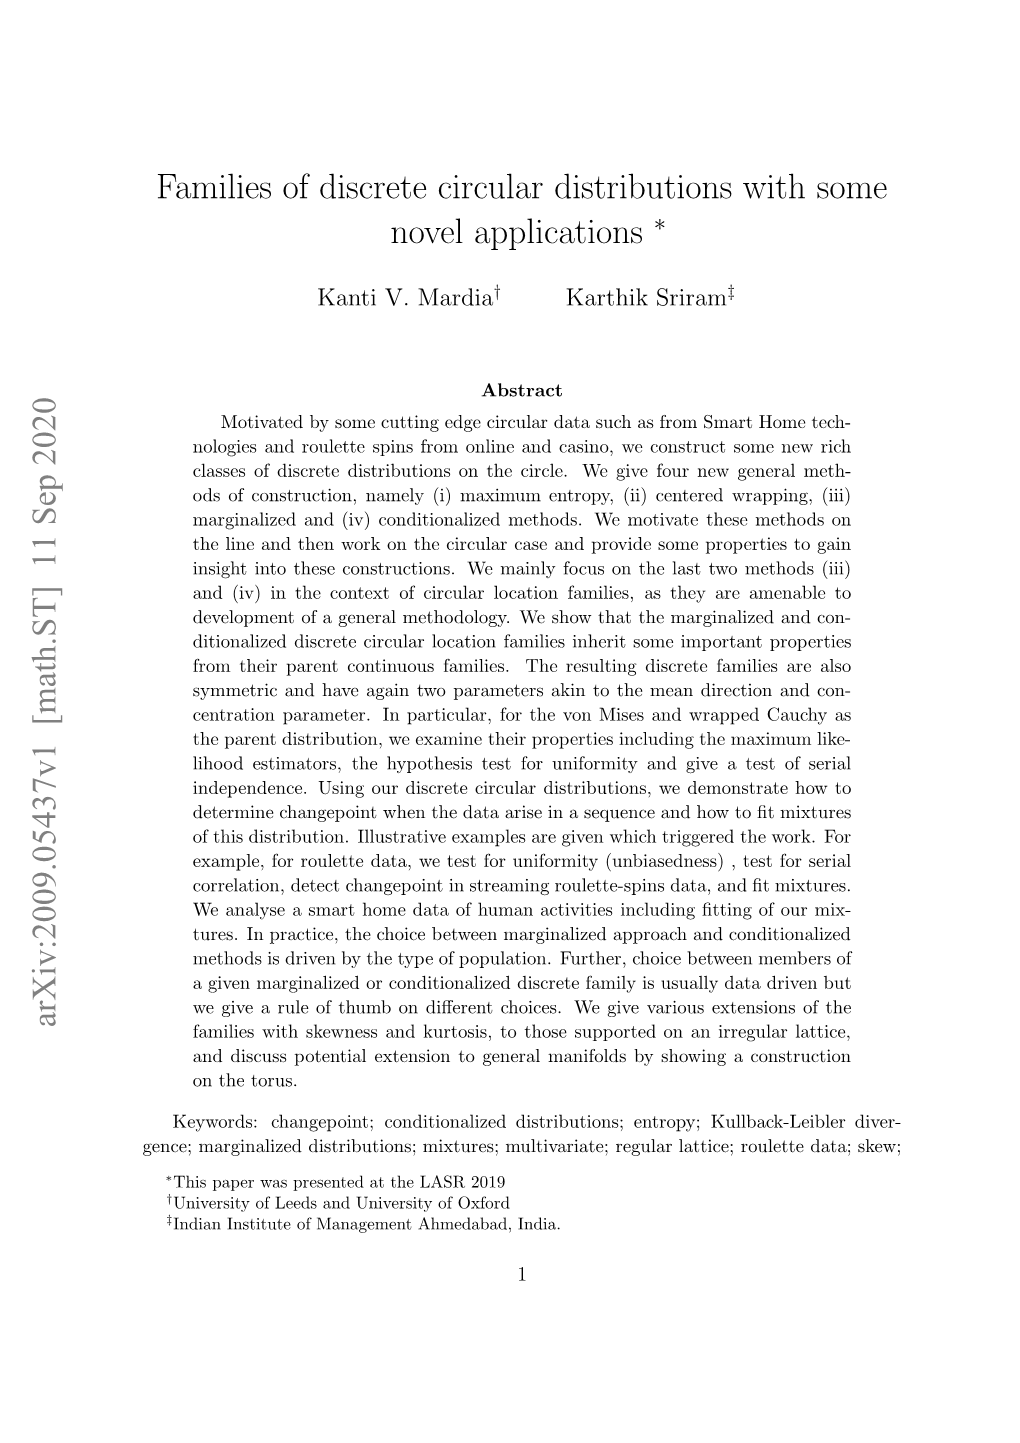 Arxiv:2009.05437V1 [Math.ST] 11 Sep 2020 Families of Discrete Circular Distributions with Some Novel Applications ∗